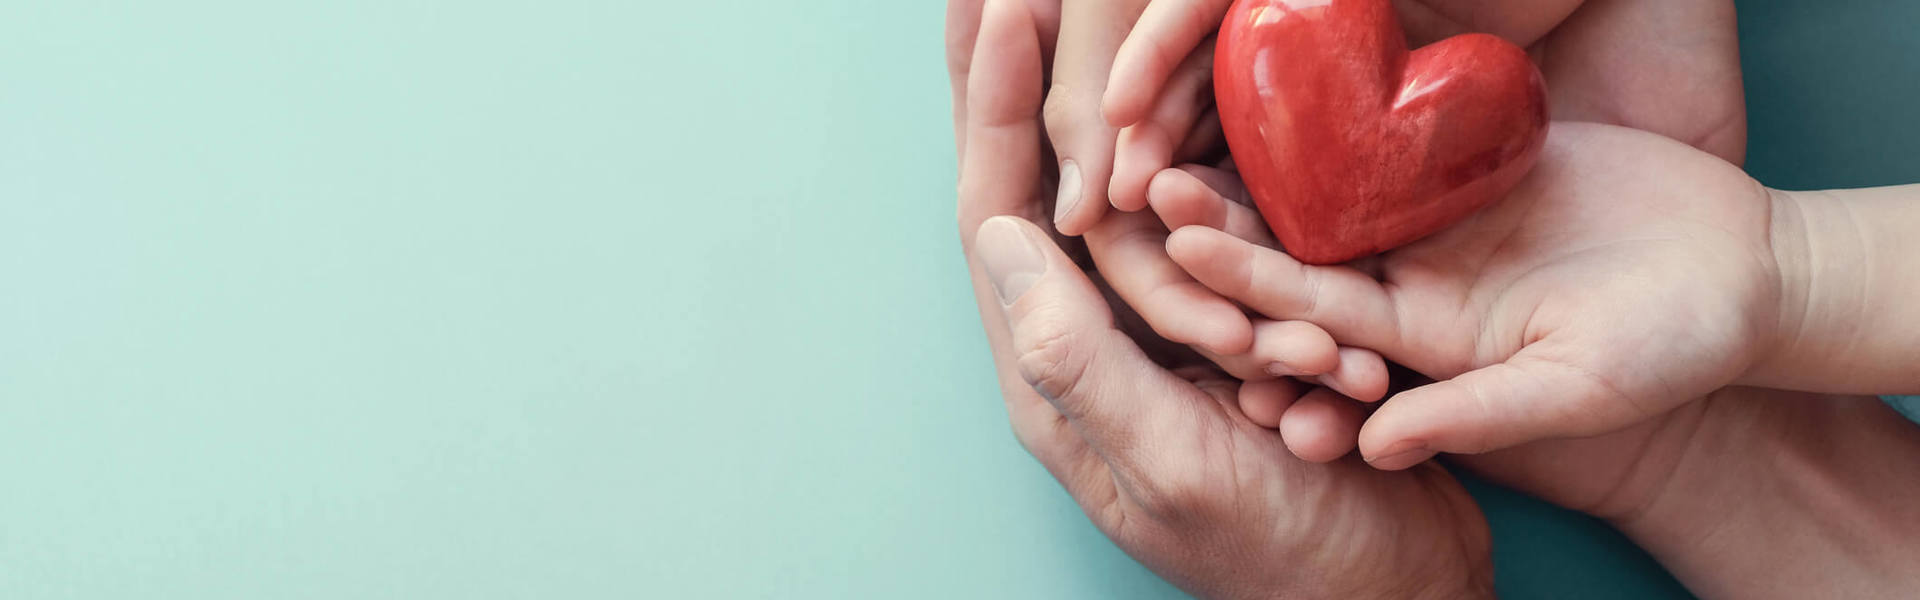 a parent and child's hands both holding a red heart ornament